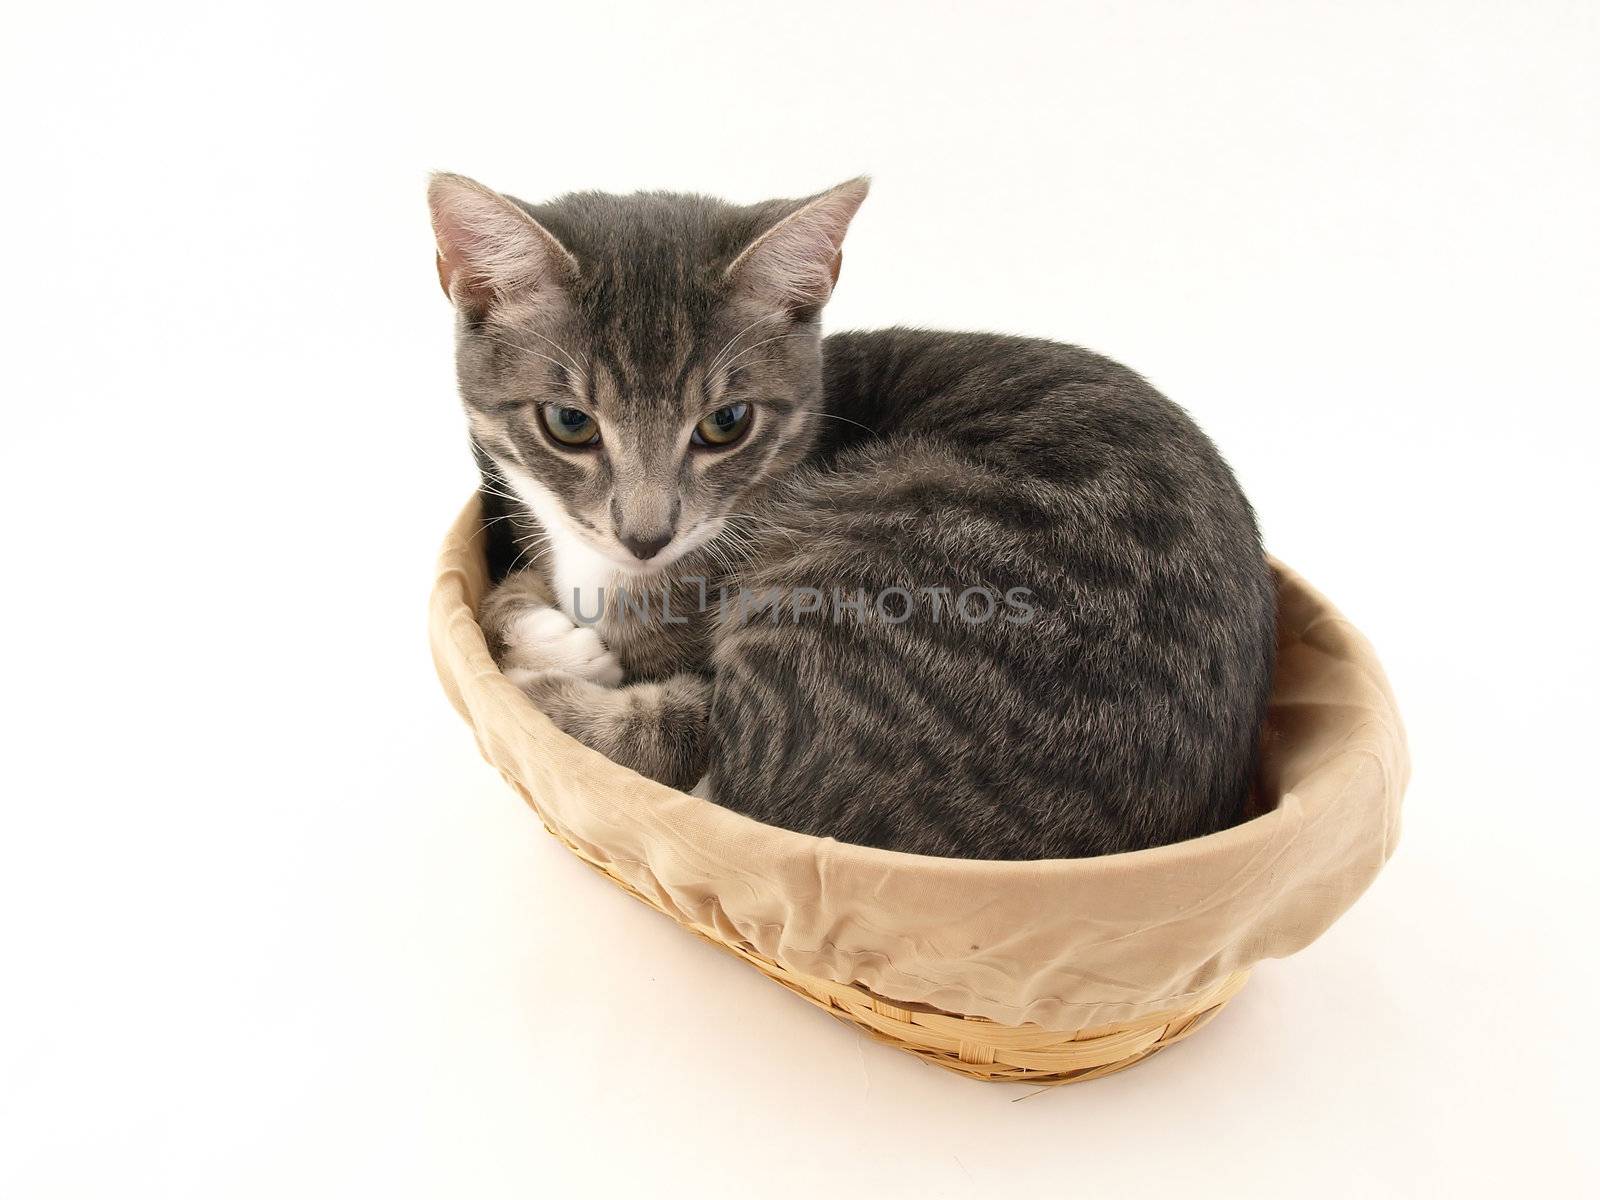 A gray kitten in a tan basket isolated on a white background